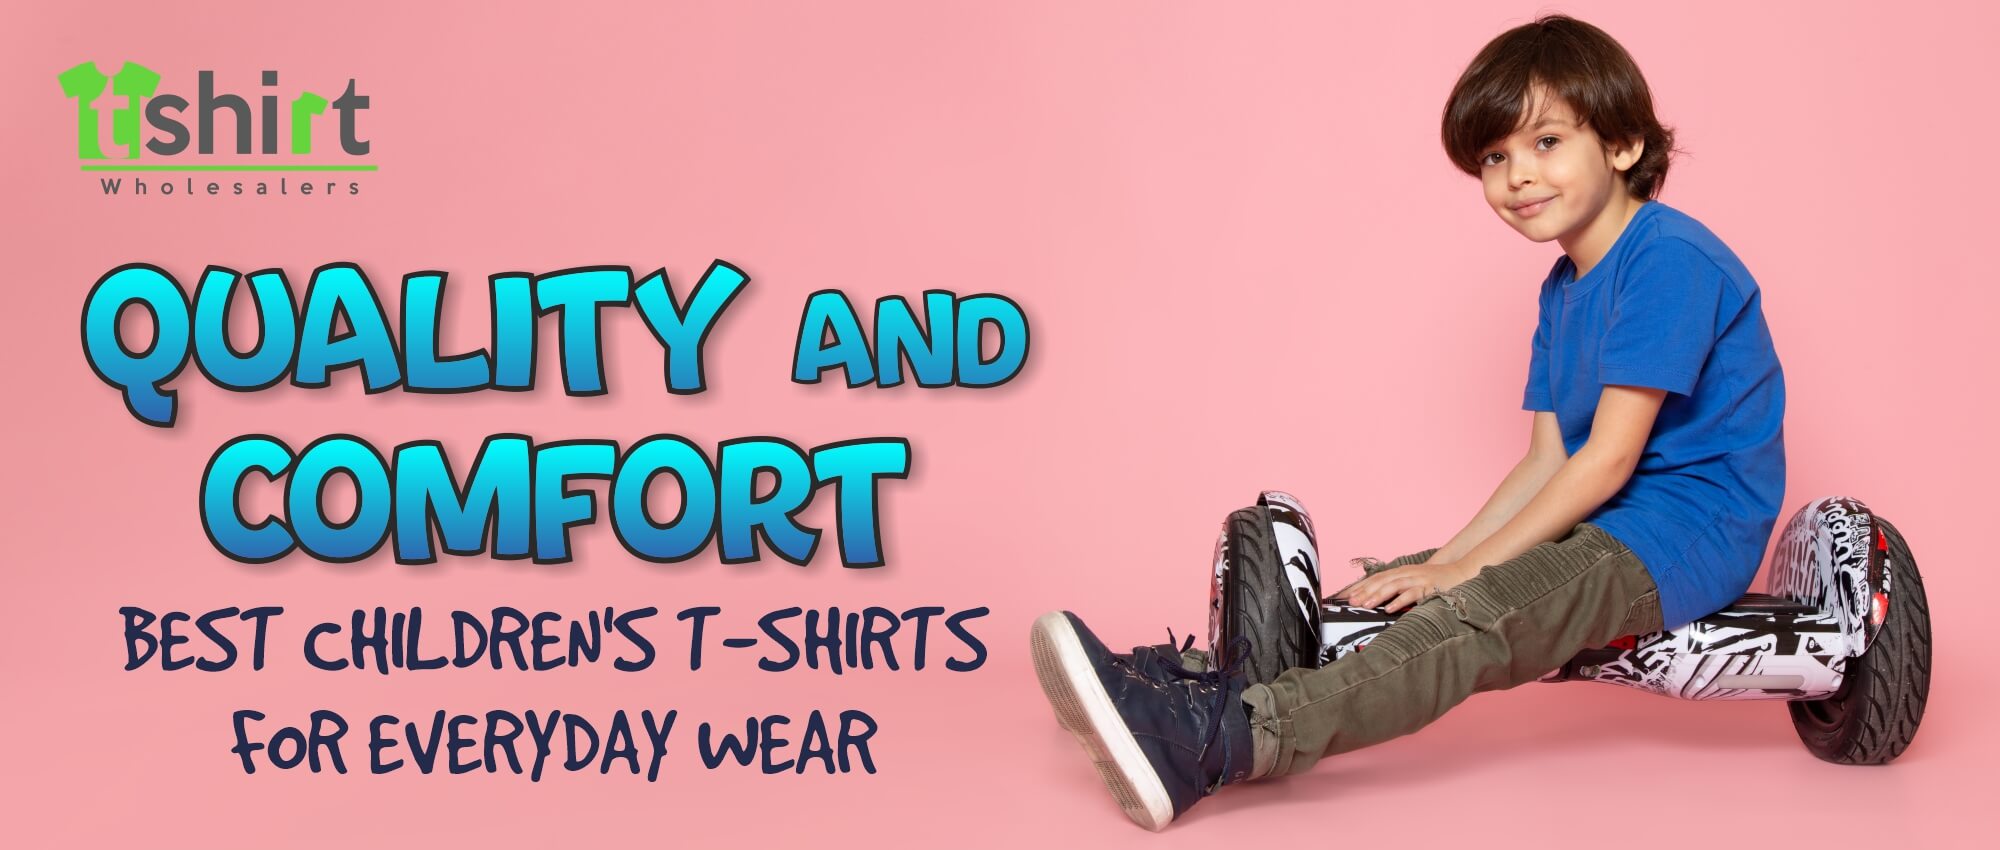 QUALITY AND COMFORT BEST CHILDREN'S T-SHIRTS FOR EVERYDAY WEAR